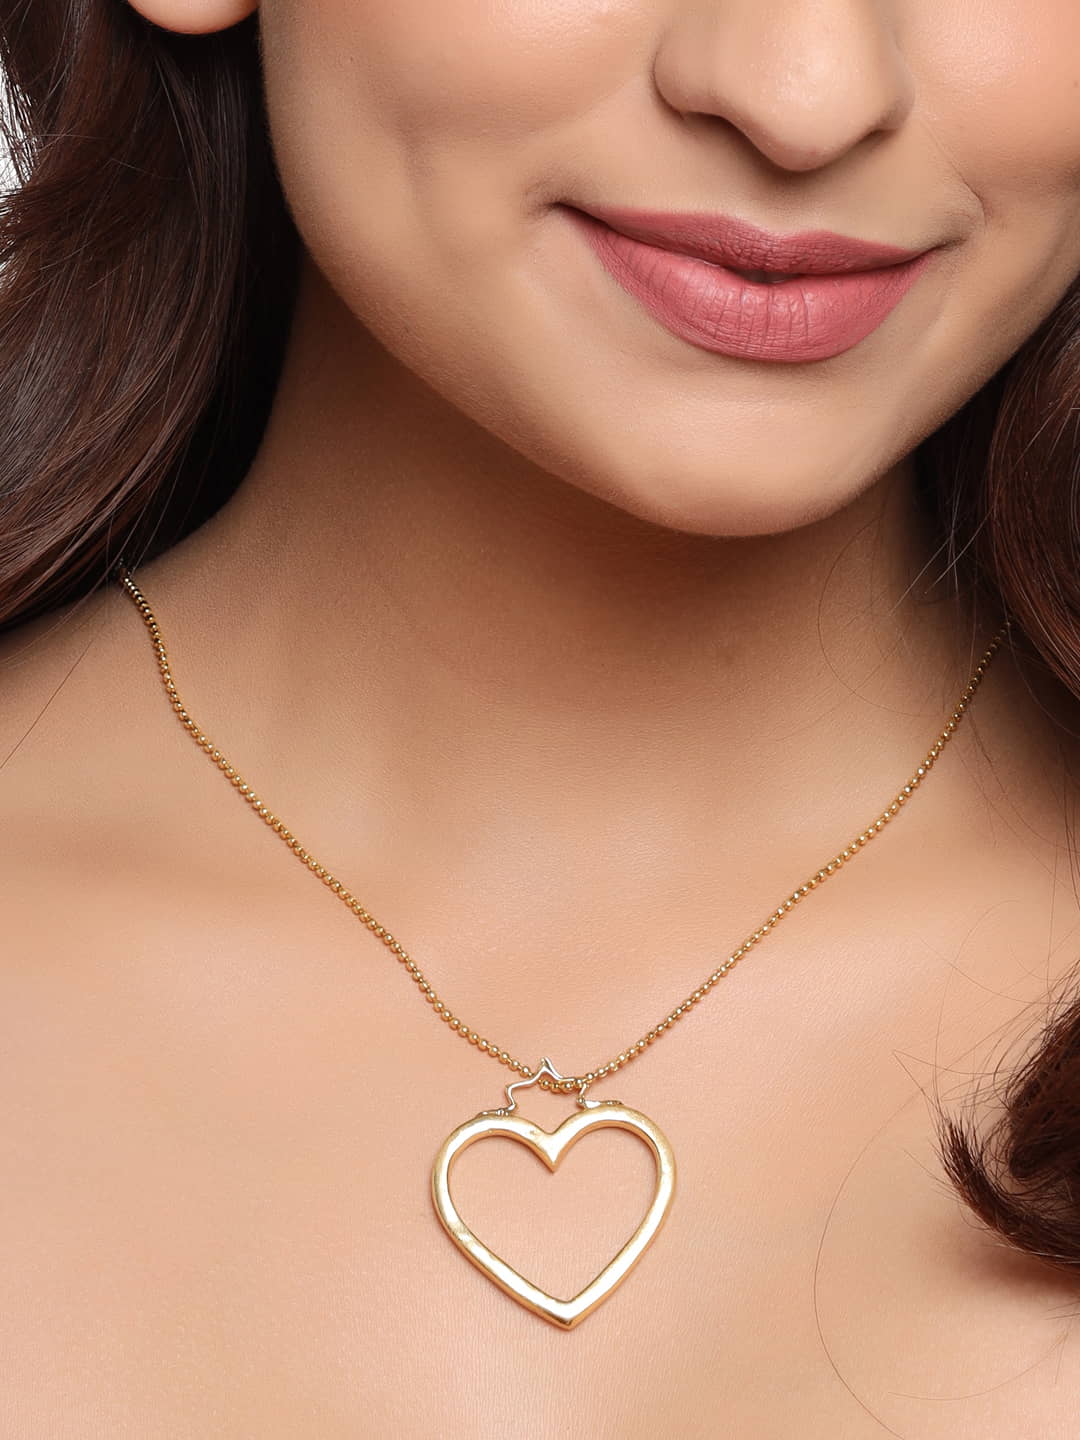 Exquisite Cross Necklace Choker Gold Chain Drop Pendant Wedding Necklace  Charm Fashion Jewelry Gift for Women and Girls - Walmart.com